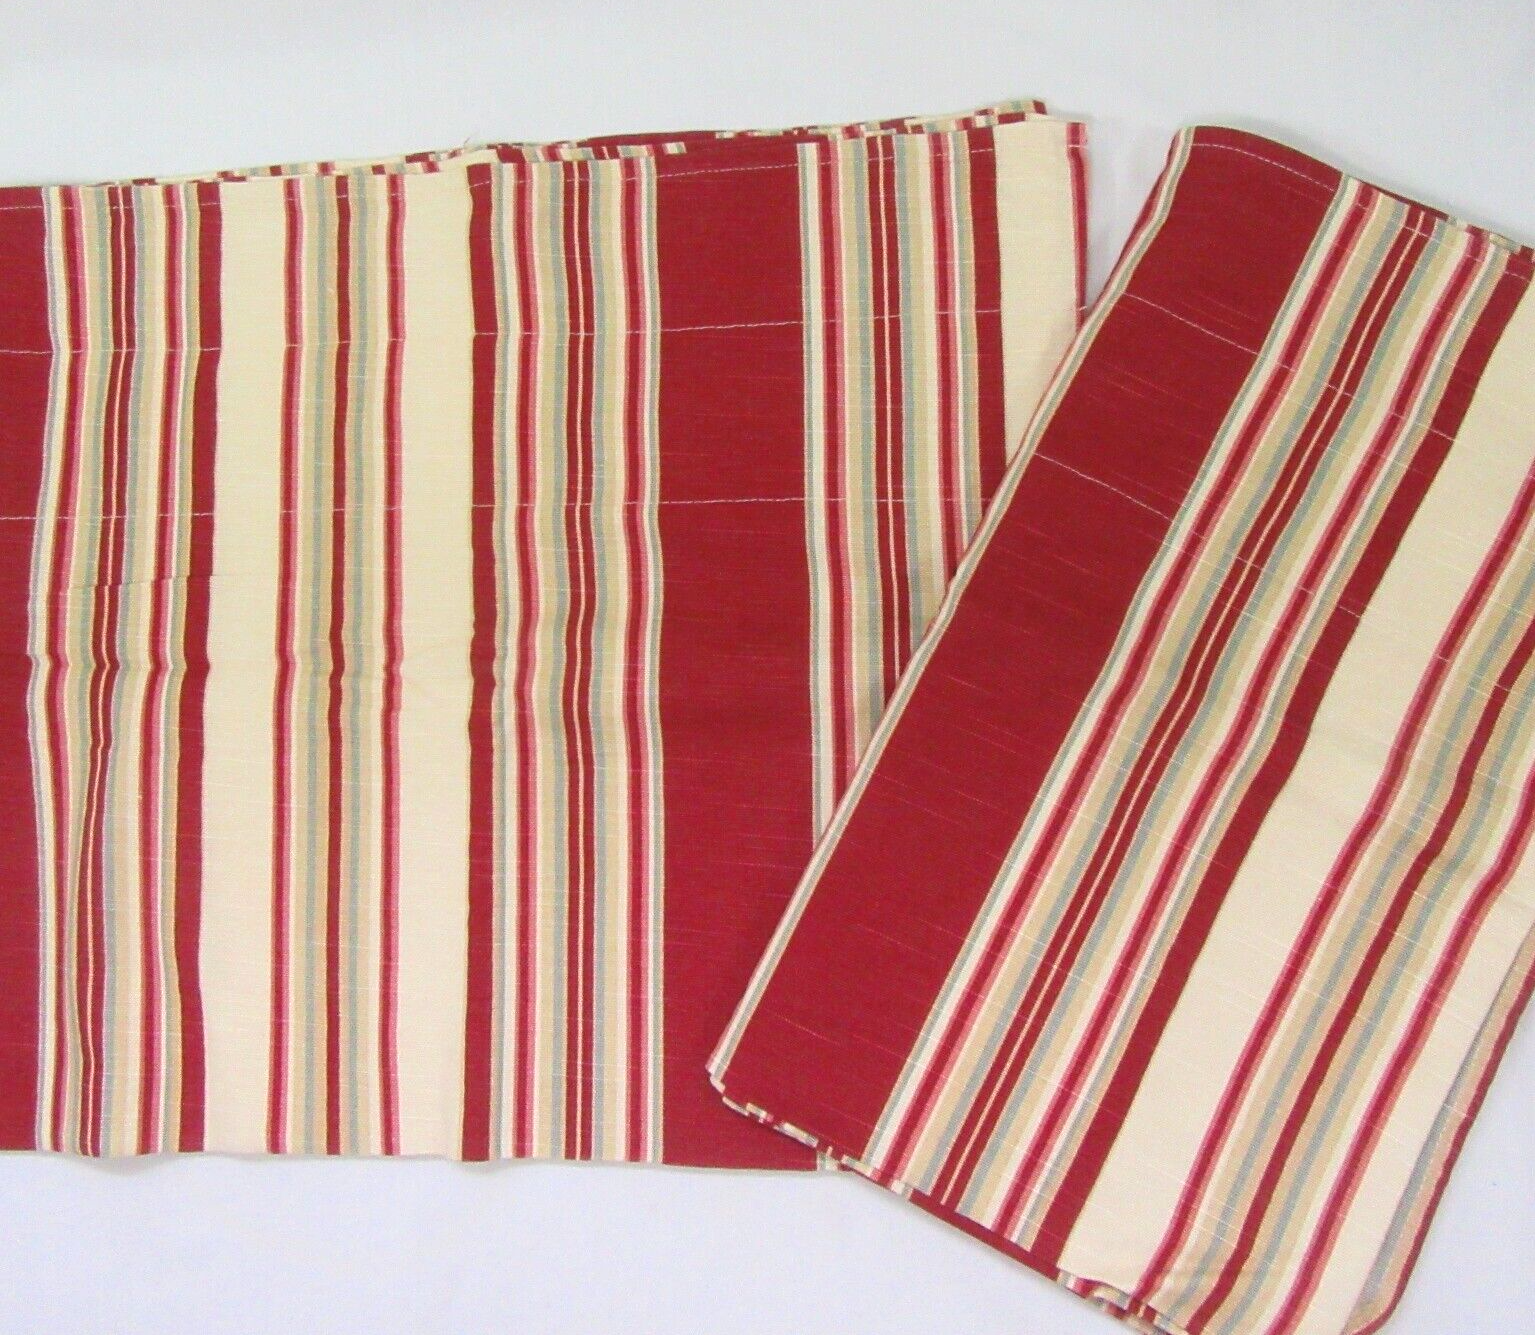 Primary image for Waverly Ballad Bouquet Stripe Red Multi 2-PC 78 x 14 Window Valance Set(s)